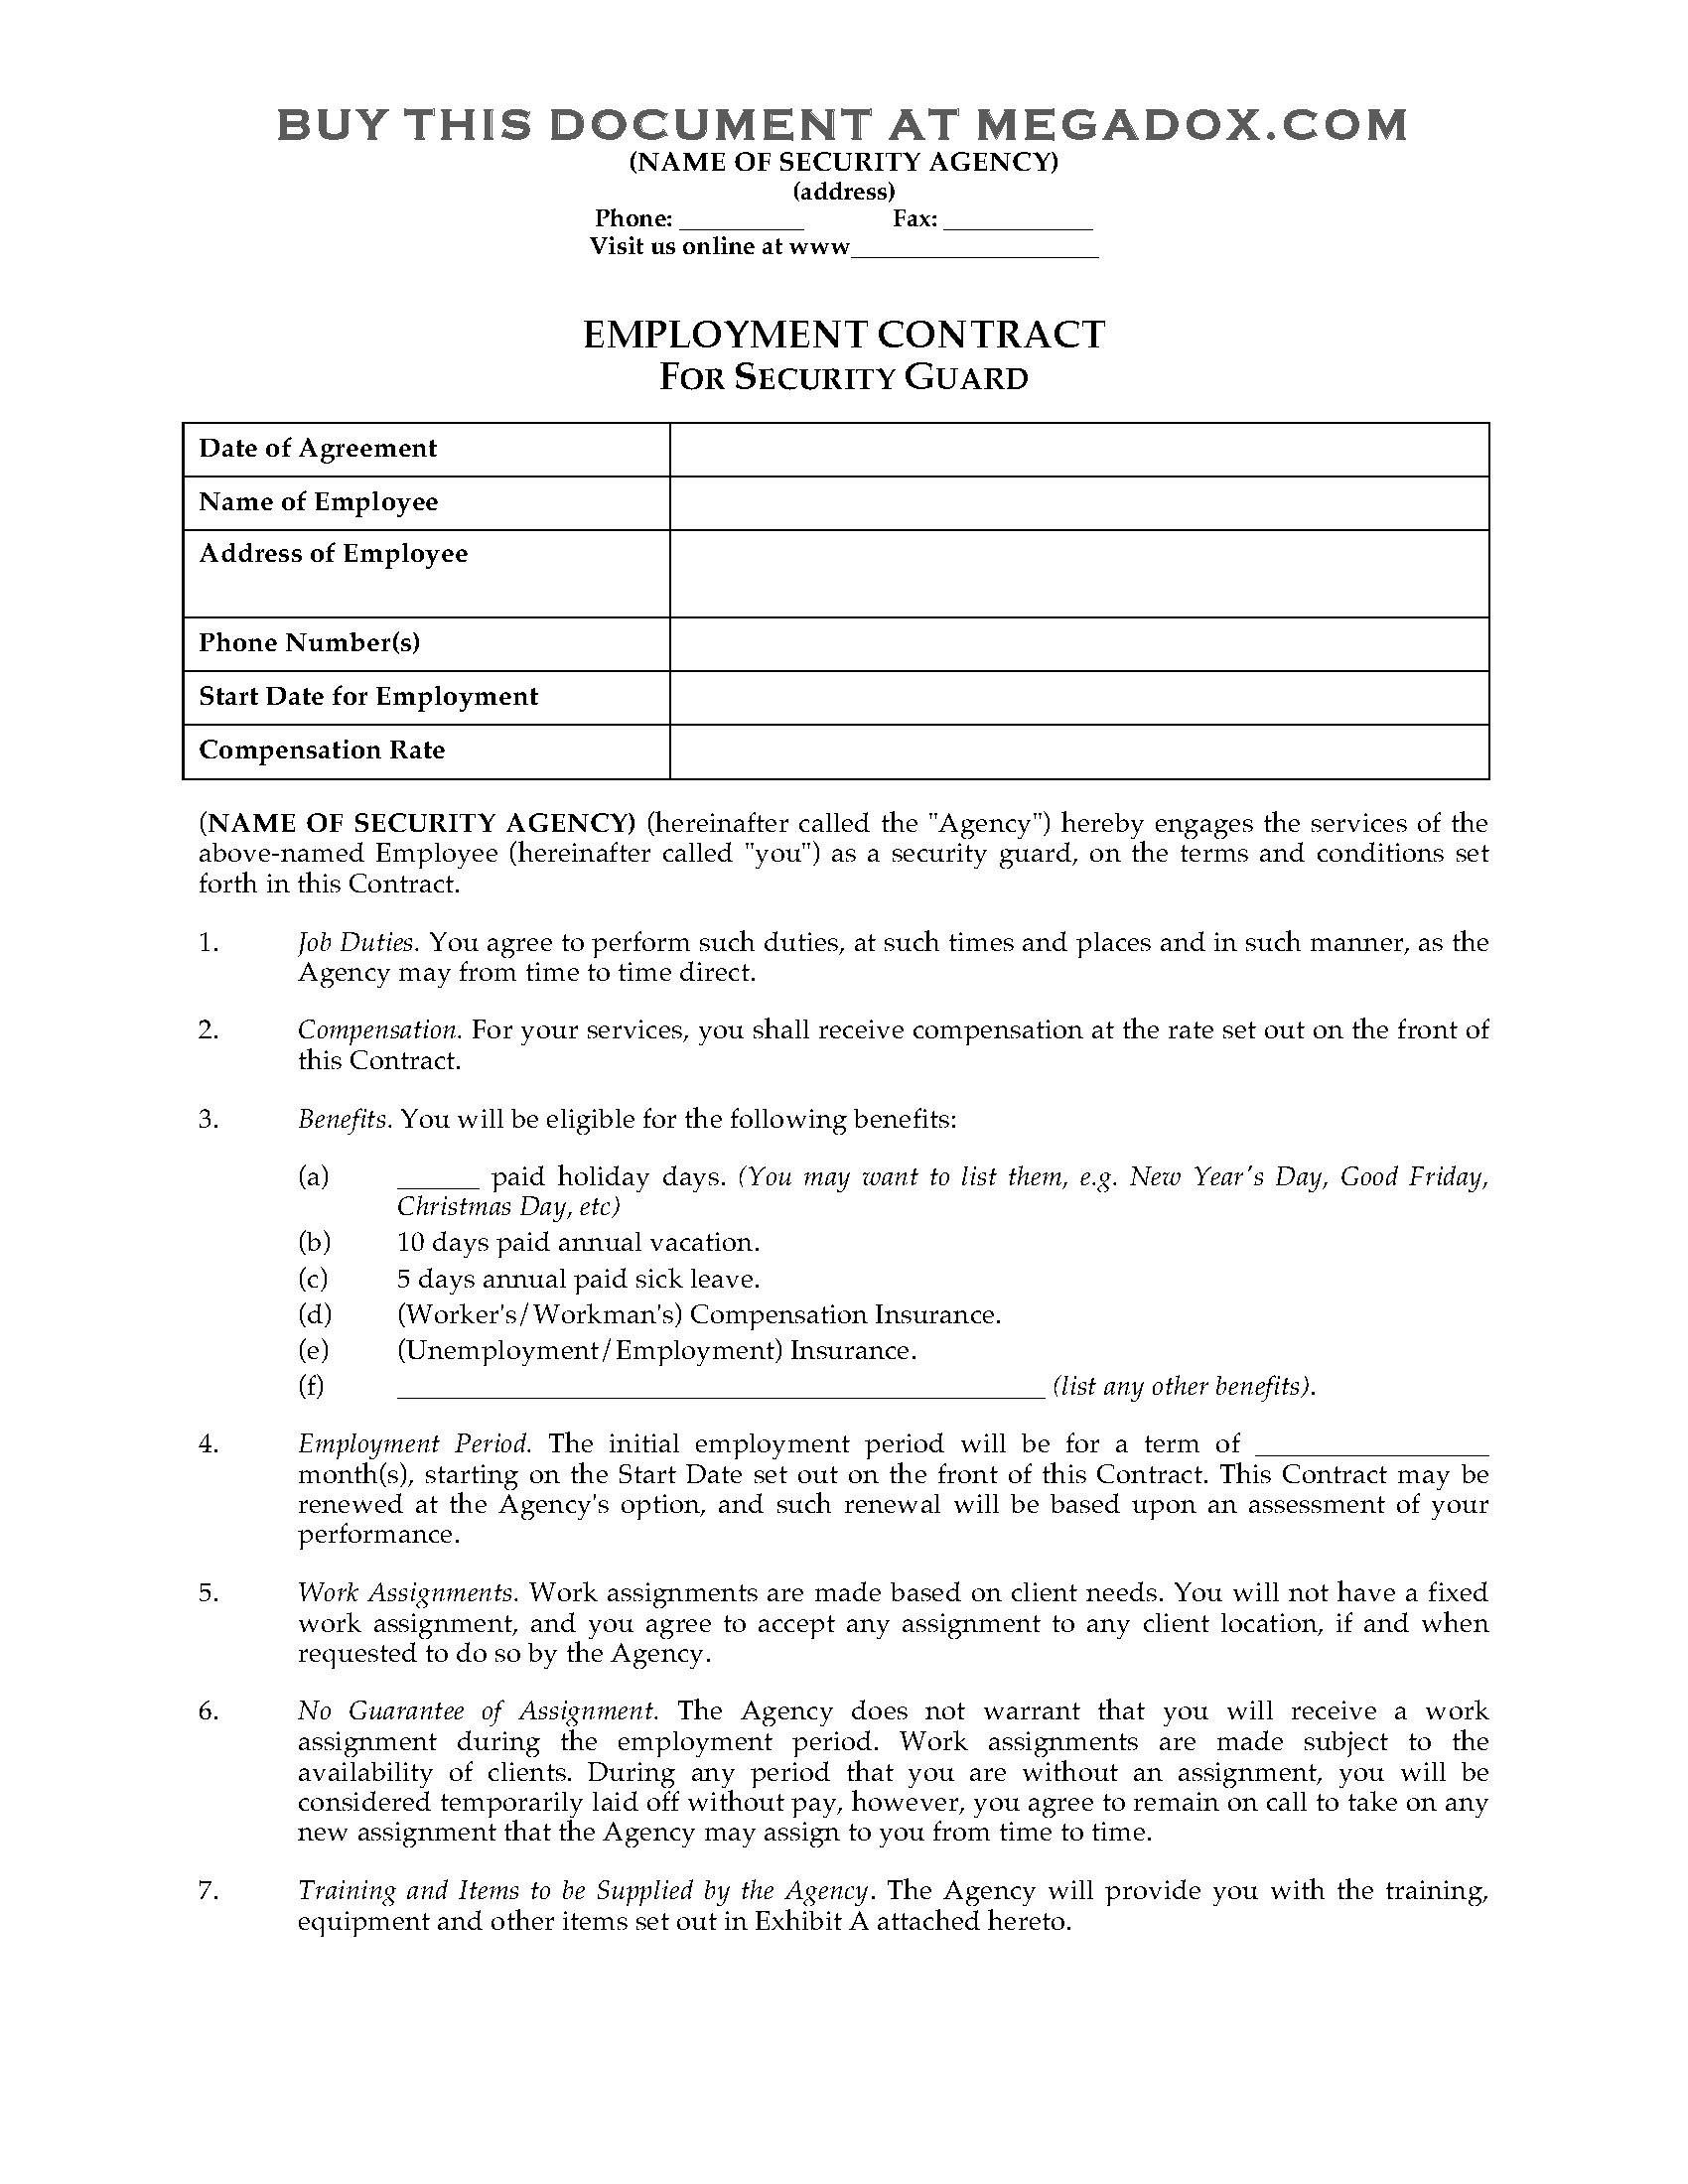 Agreement With Employee Security Guard Employment Contract